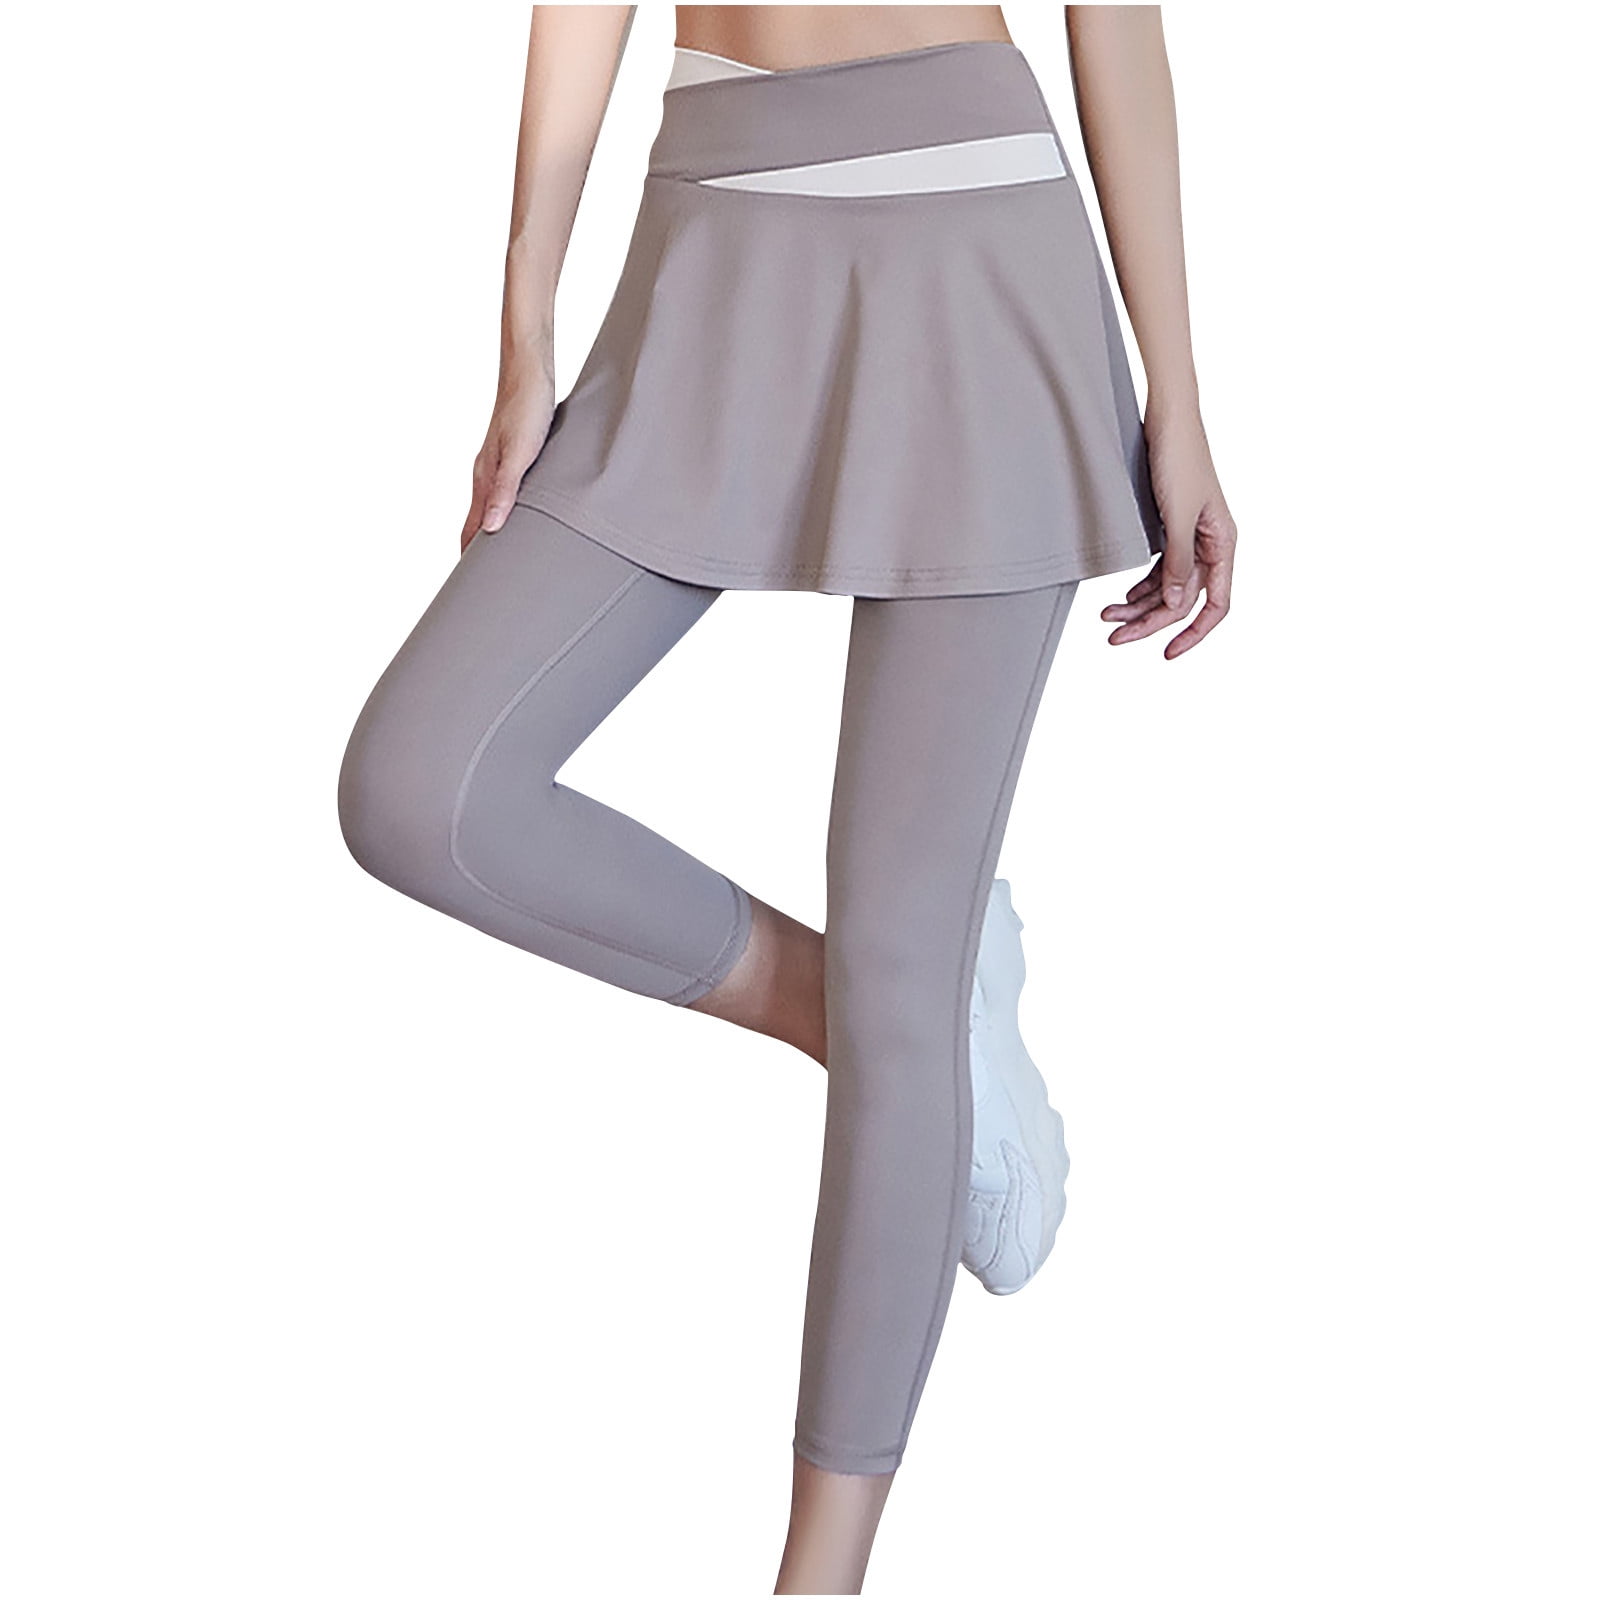 JWZUY Yoga Skirted Leggings with Pockets Women Active Athletic Ruffle  Pleated Golf Tennis Color Block Skirt Pants Blue M